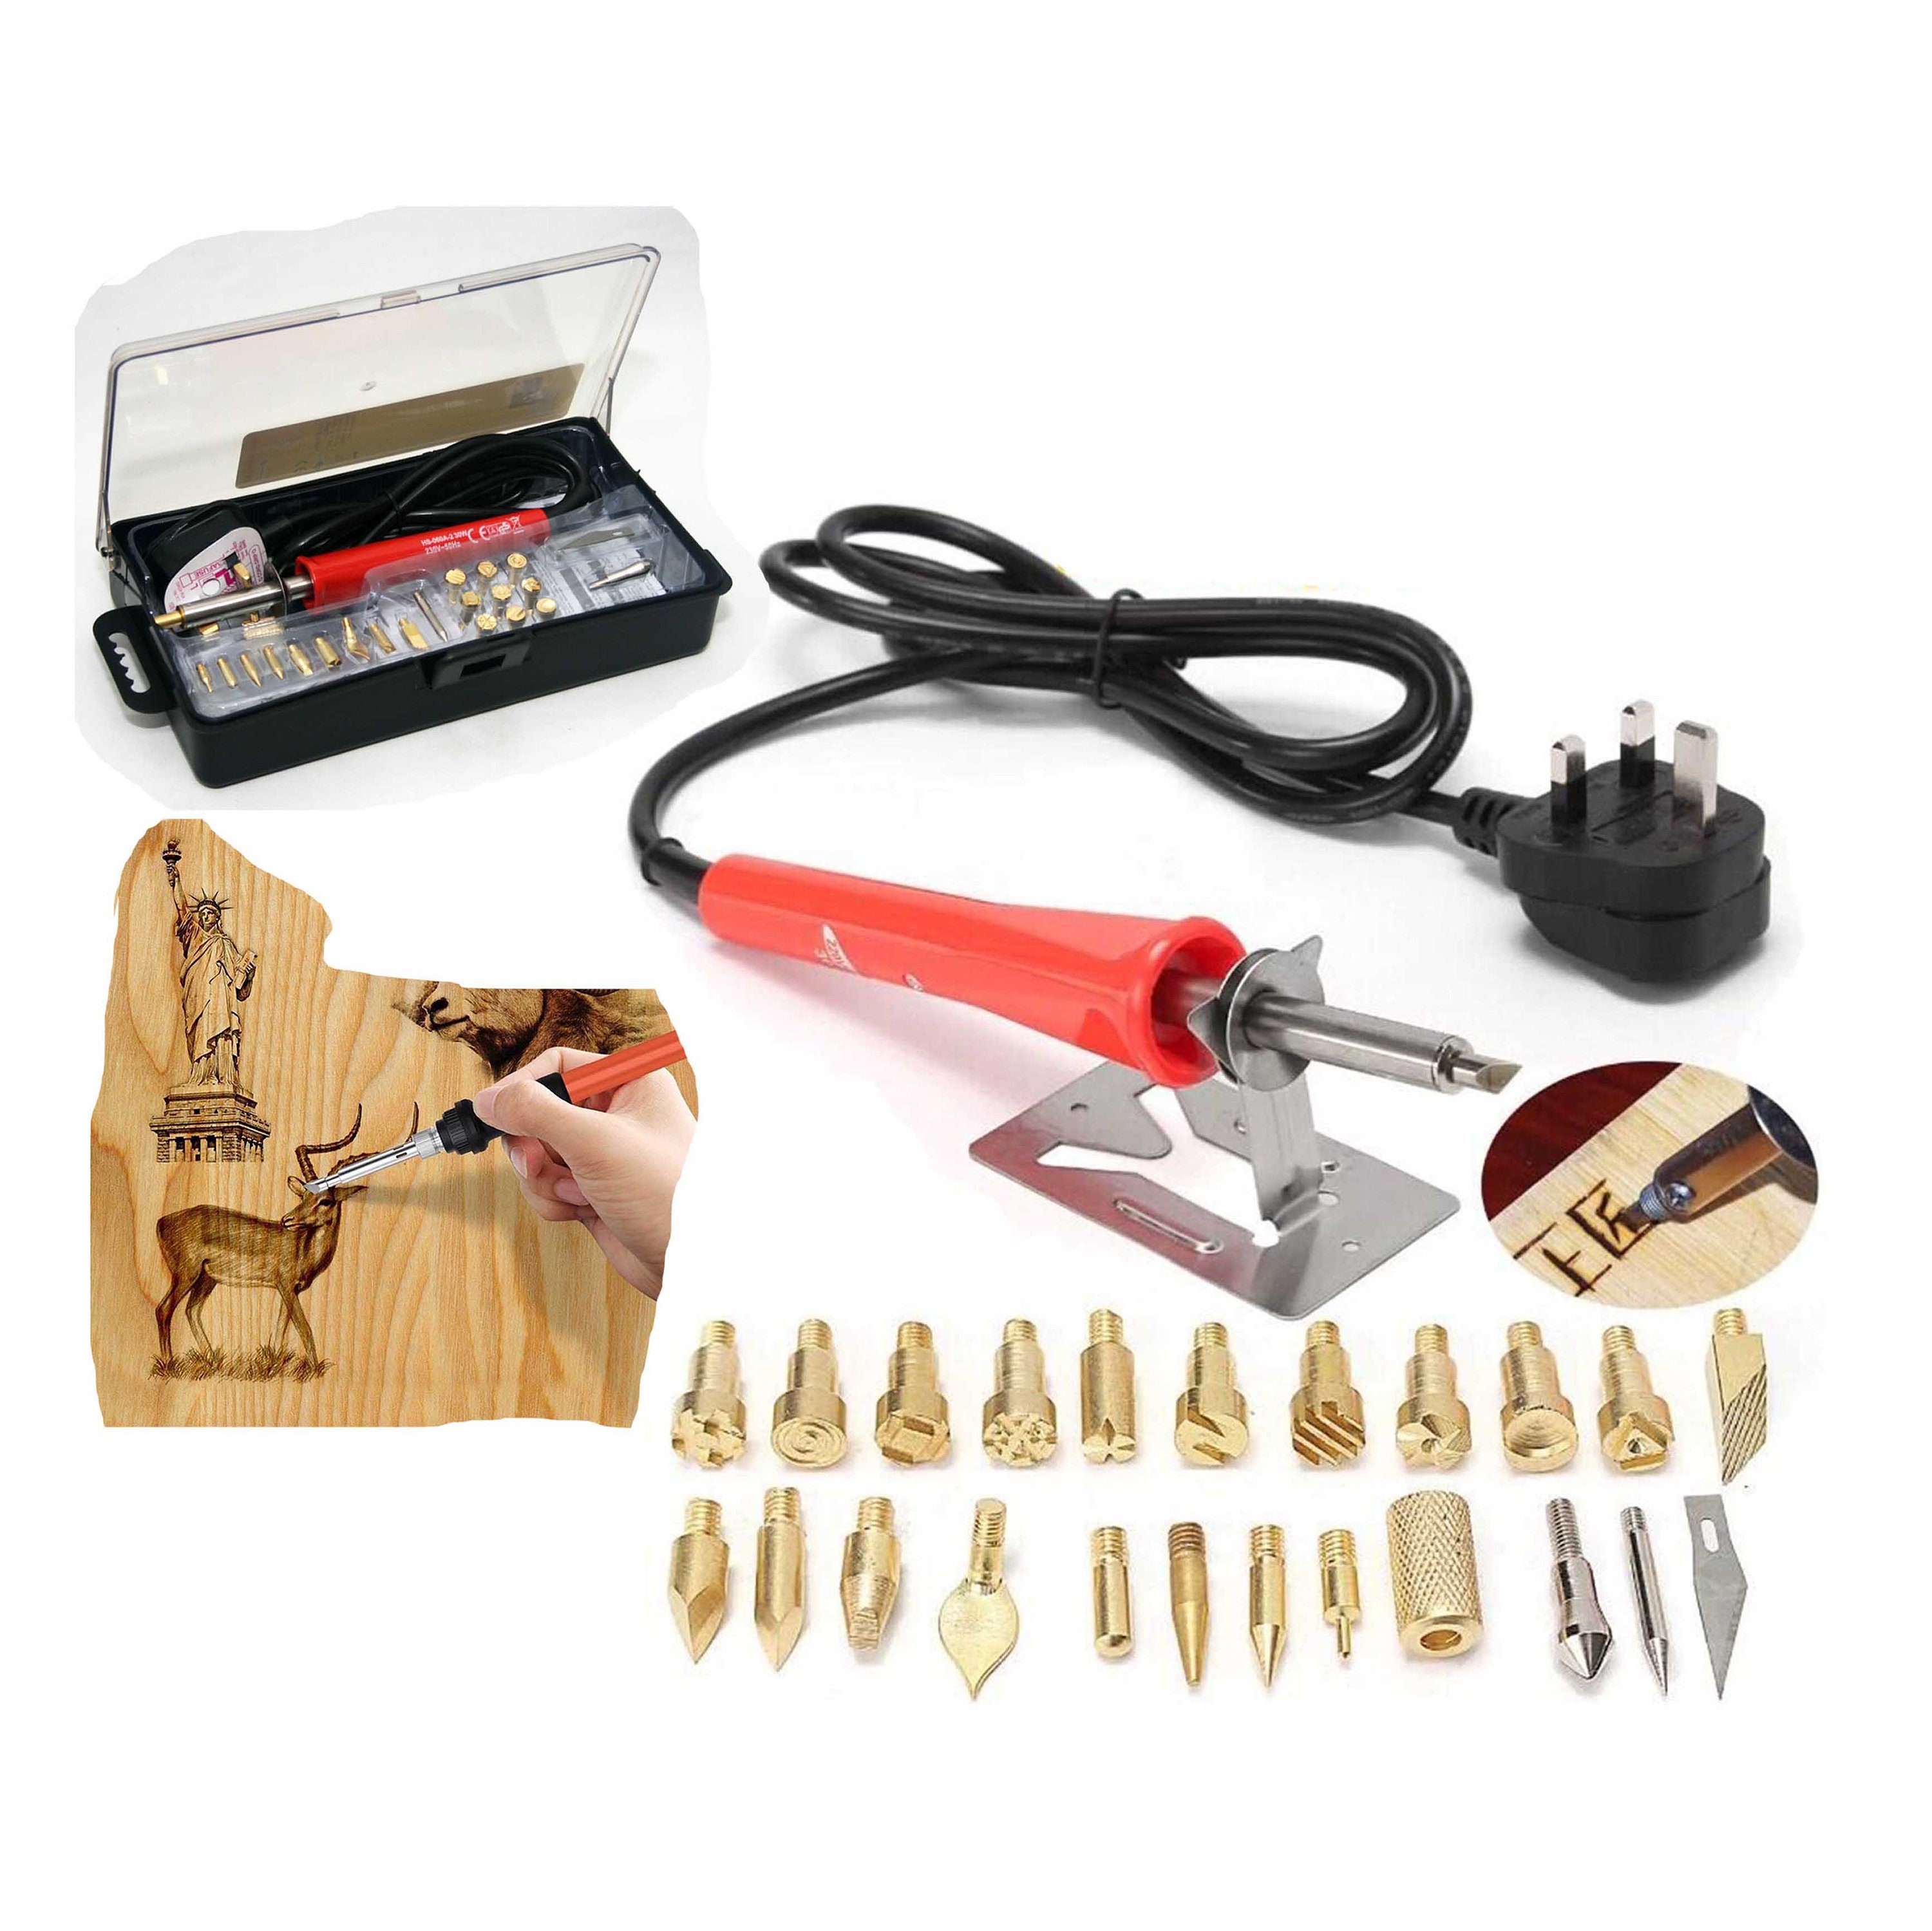 Vintager Wood Burning Pen Kit Electric Pyrography Pen With 5pcs 60 W  Temperature Controlled Price in India - Buy Vintager Wood Burning Pen Kit  Electric Pyrography Pen With 5pcs 60 W Temperature Controlled online at